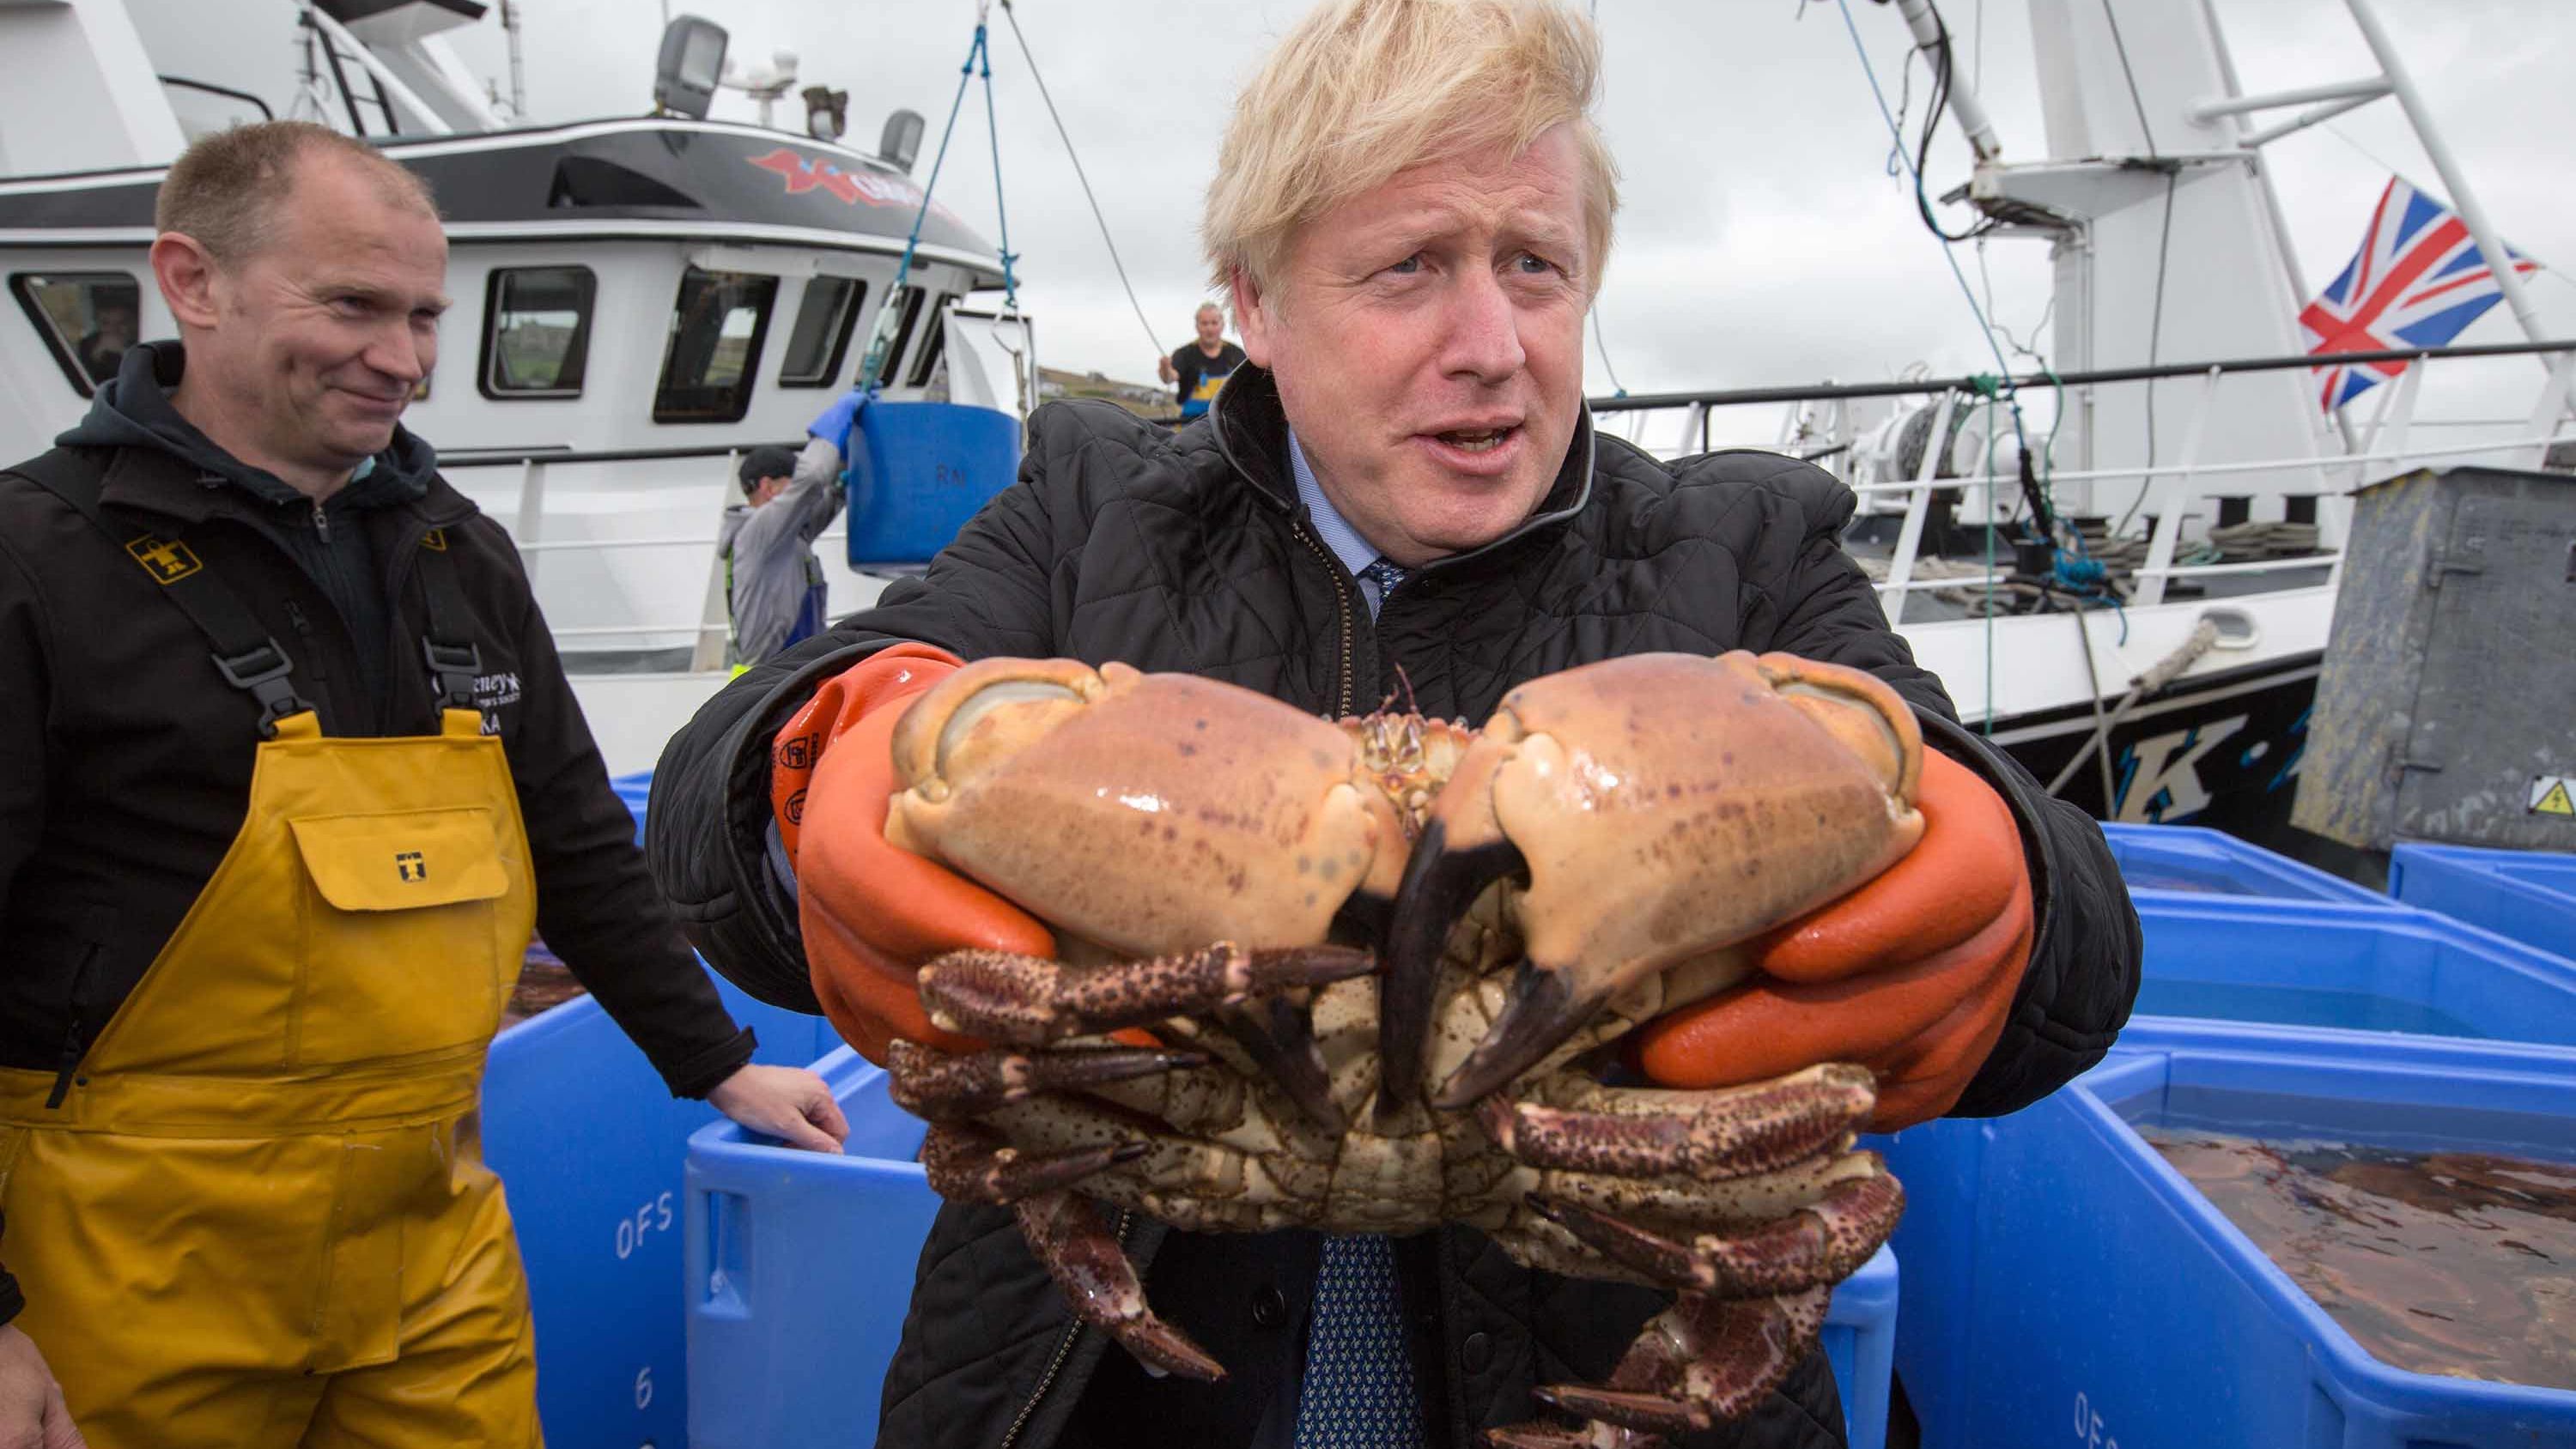 Johnson holds a crab in Stromness Harbour during a visit to Scotland in July 2020.